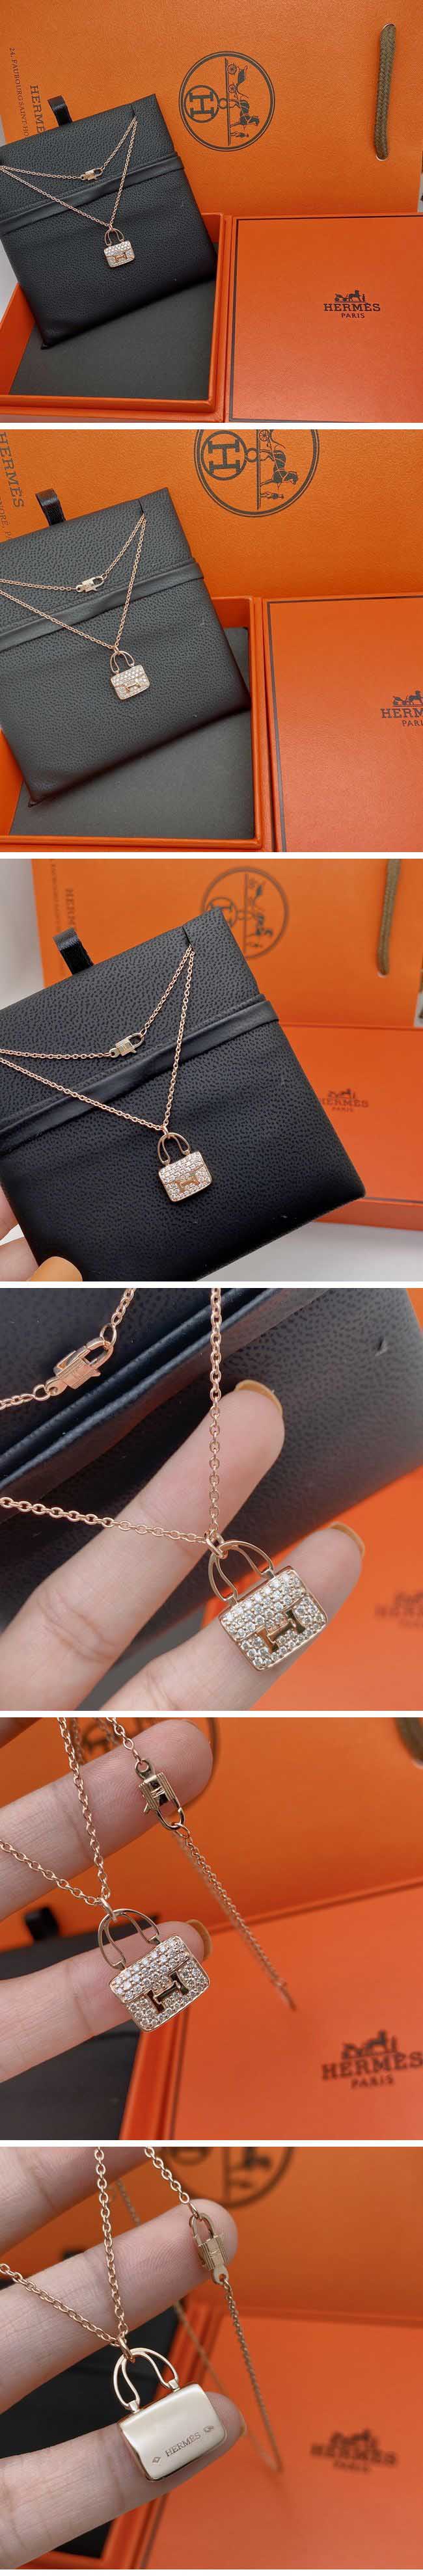 Hermes Kerry Bag Design Necklace エルメス ケリーバッグ デザイン ネックレス